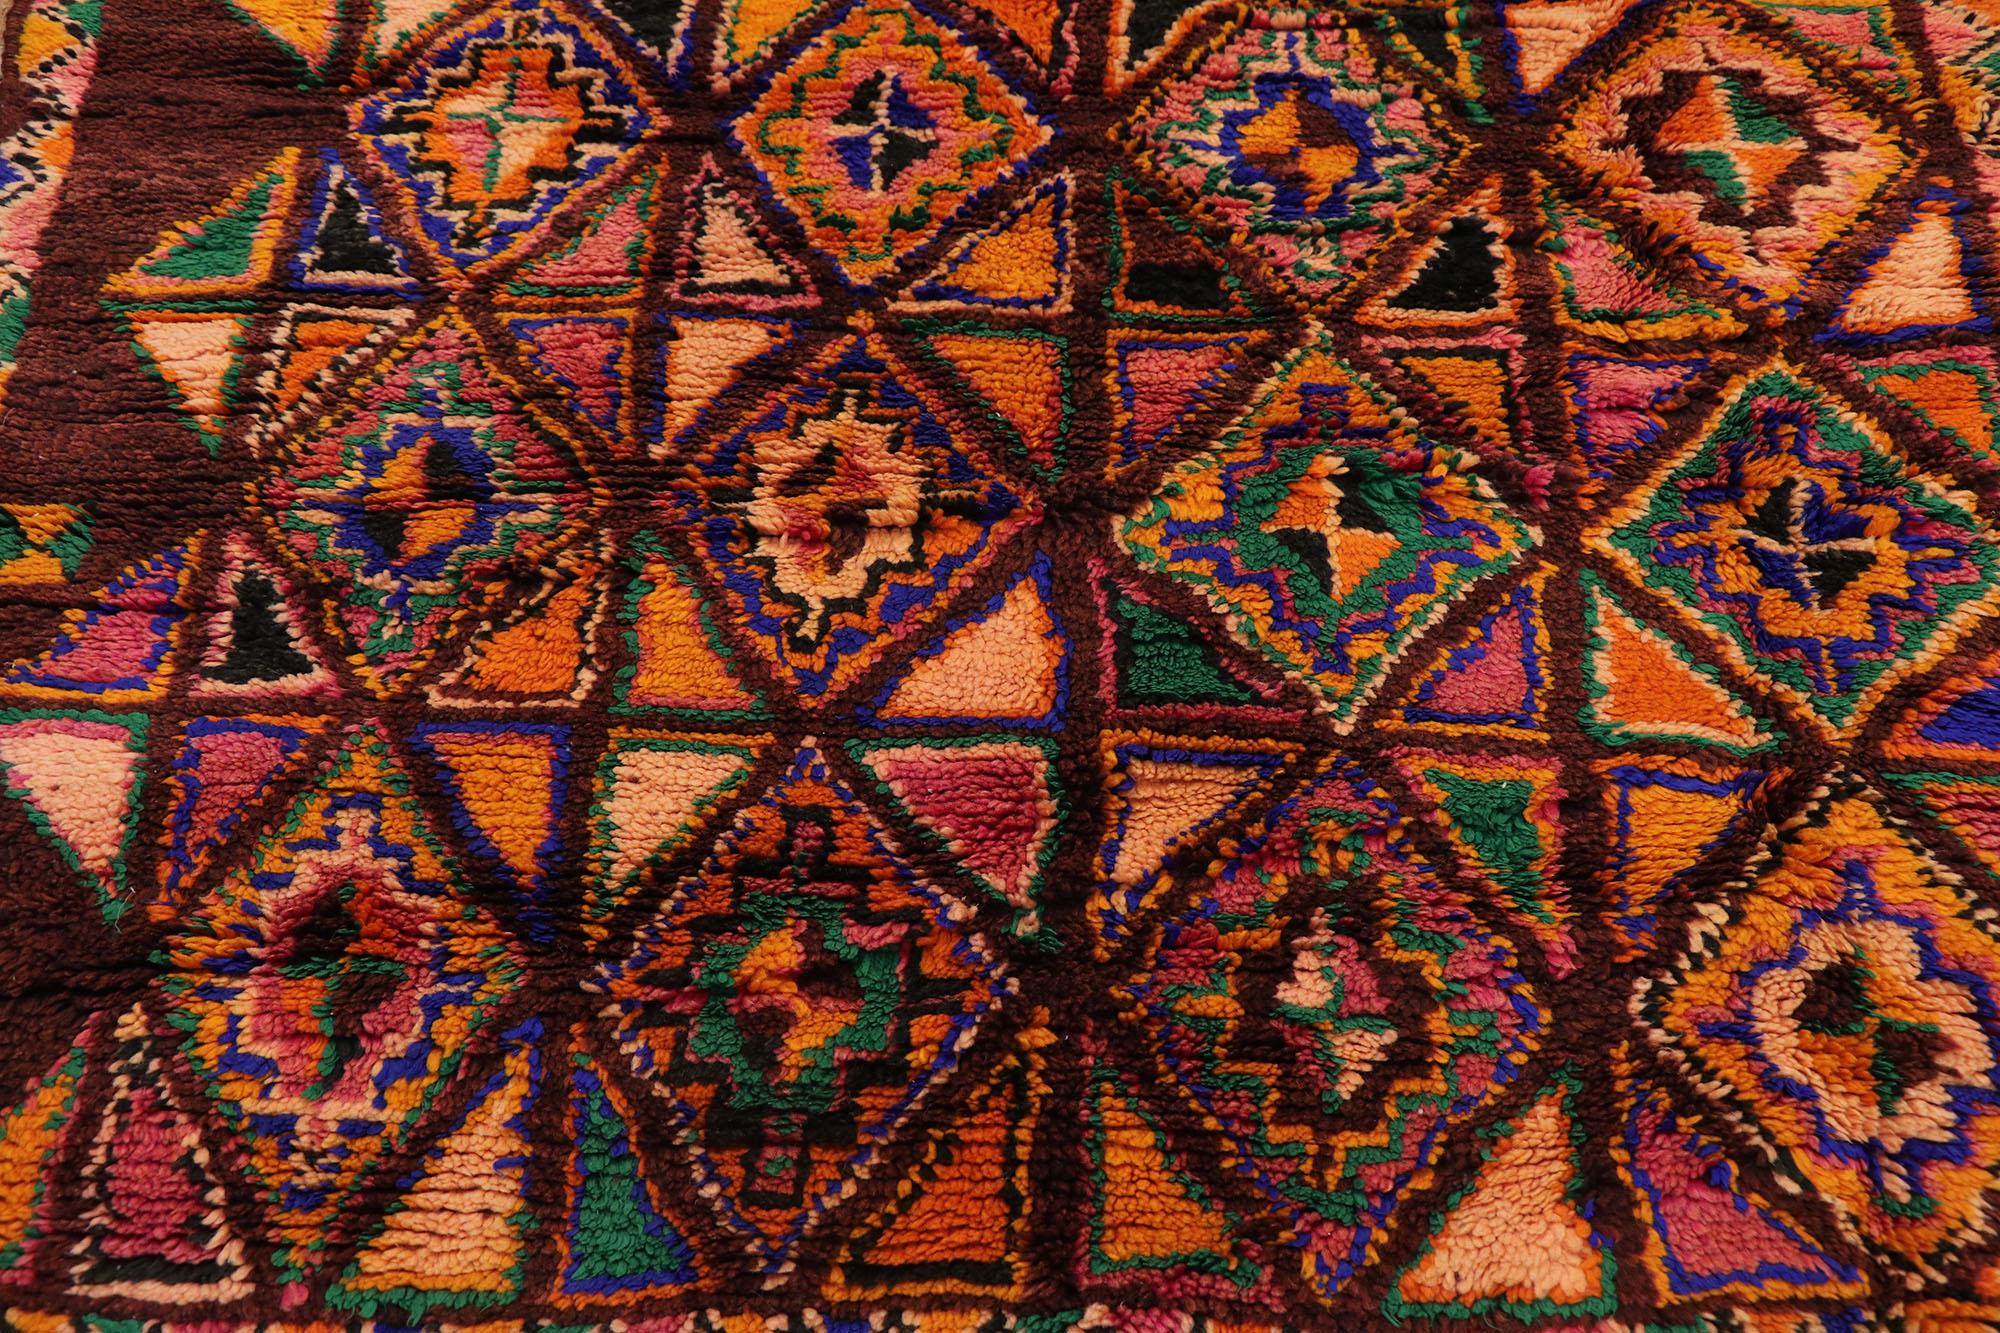 Vintage Berber Boujad Moroccan Rug with Boho Chic Tribal Style In Good Condition For Sale In Dallas, TX